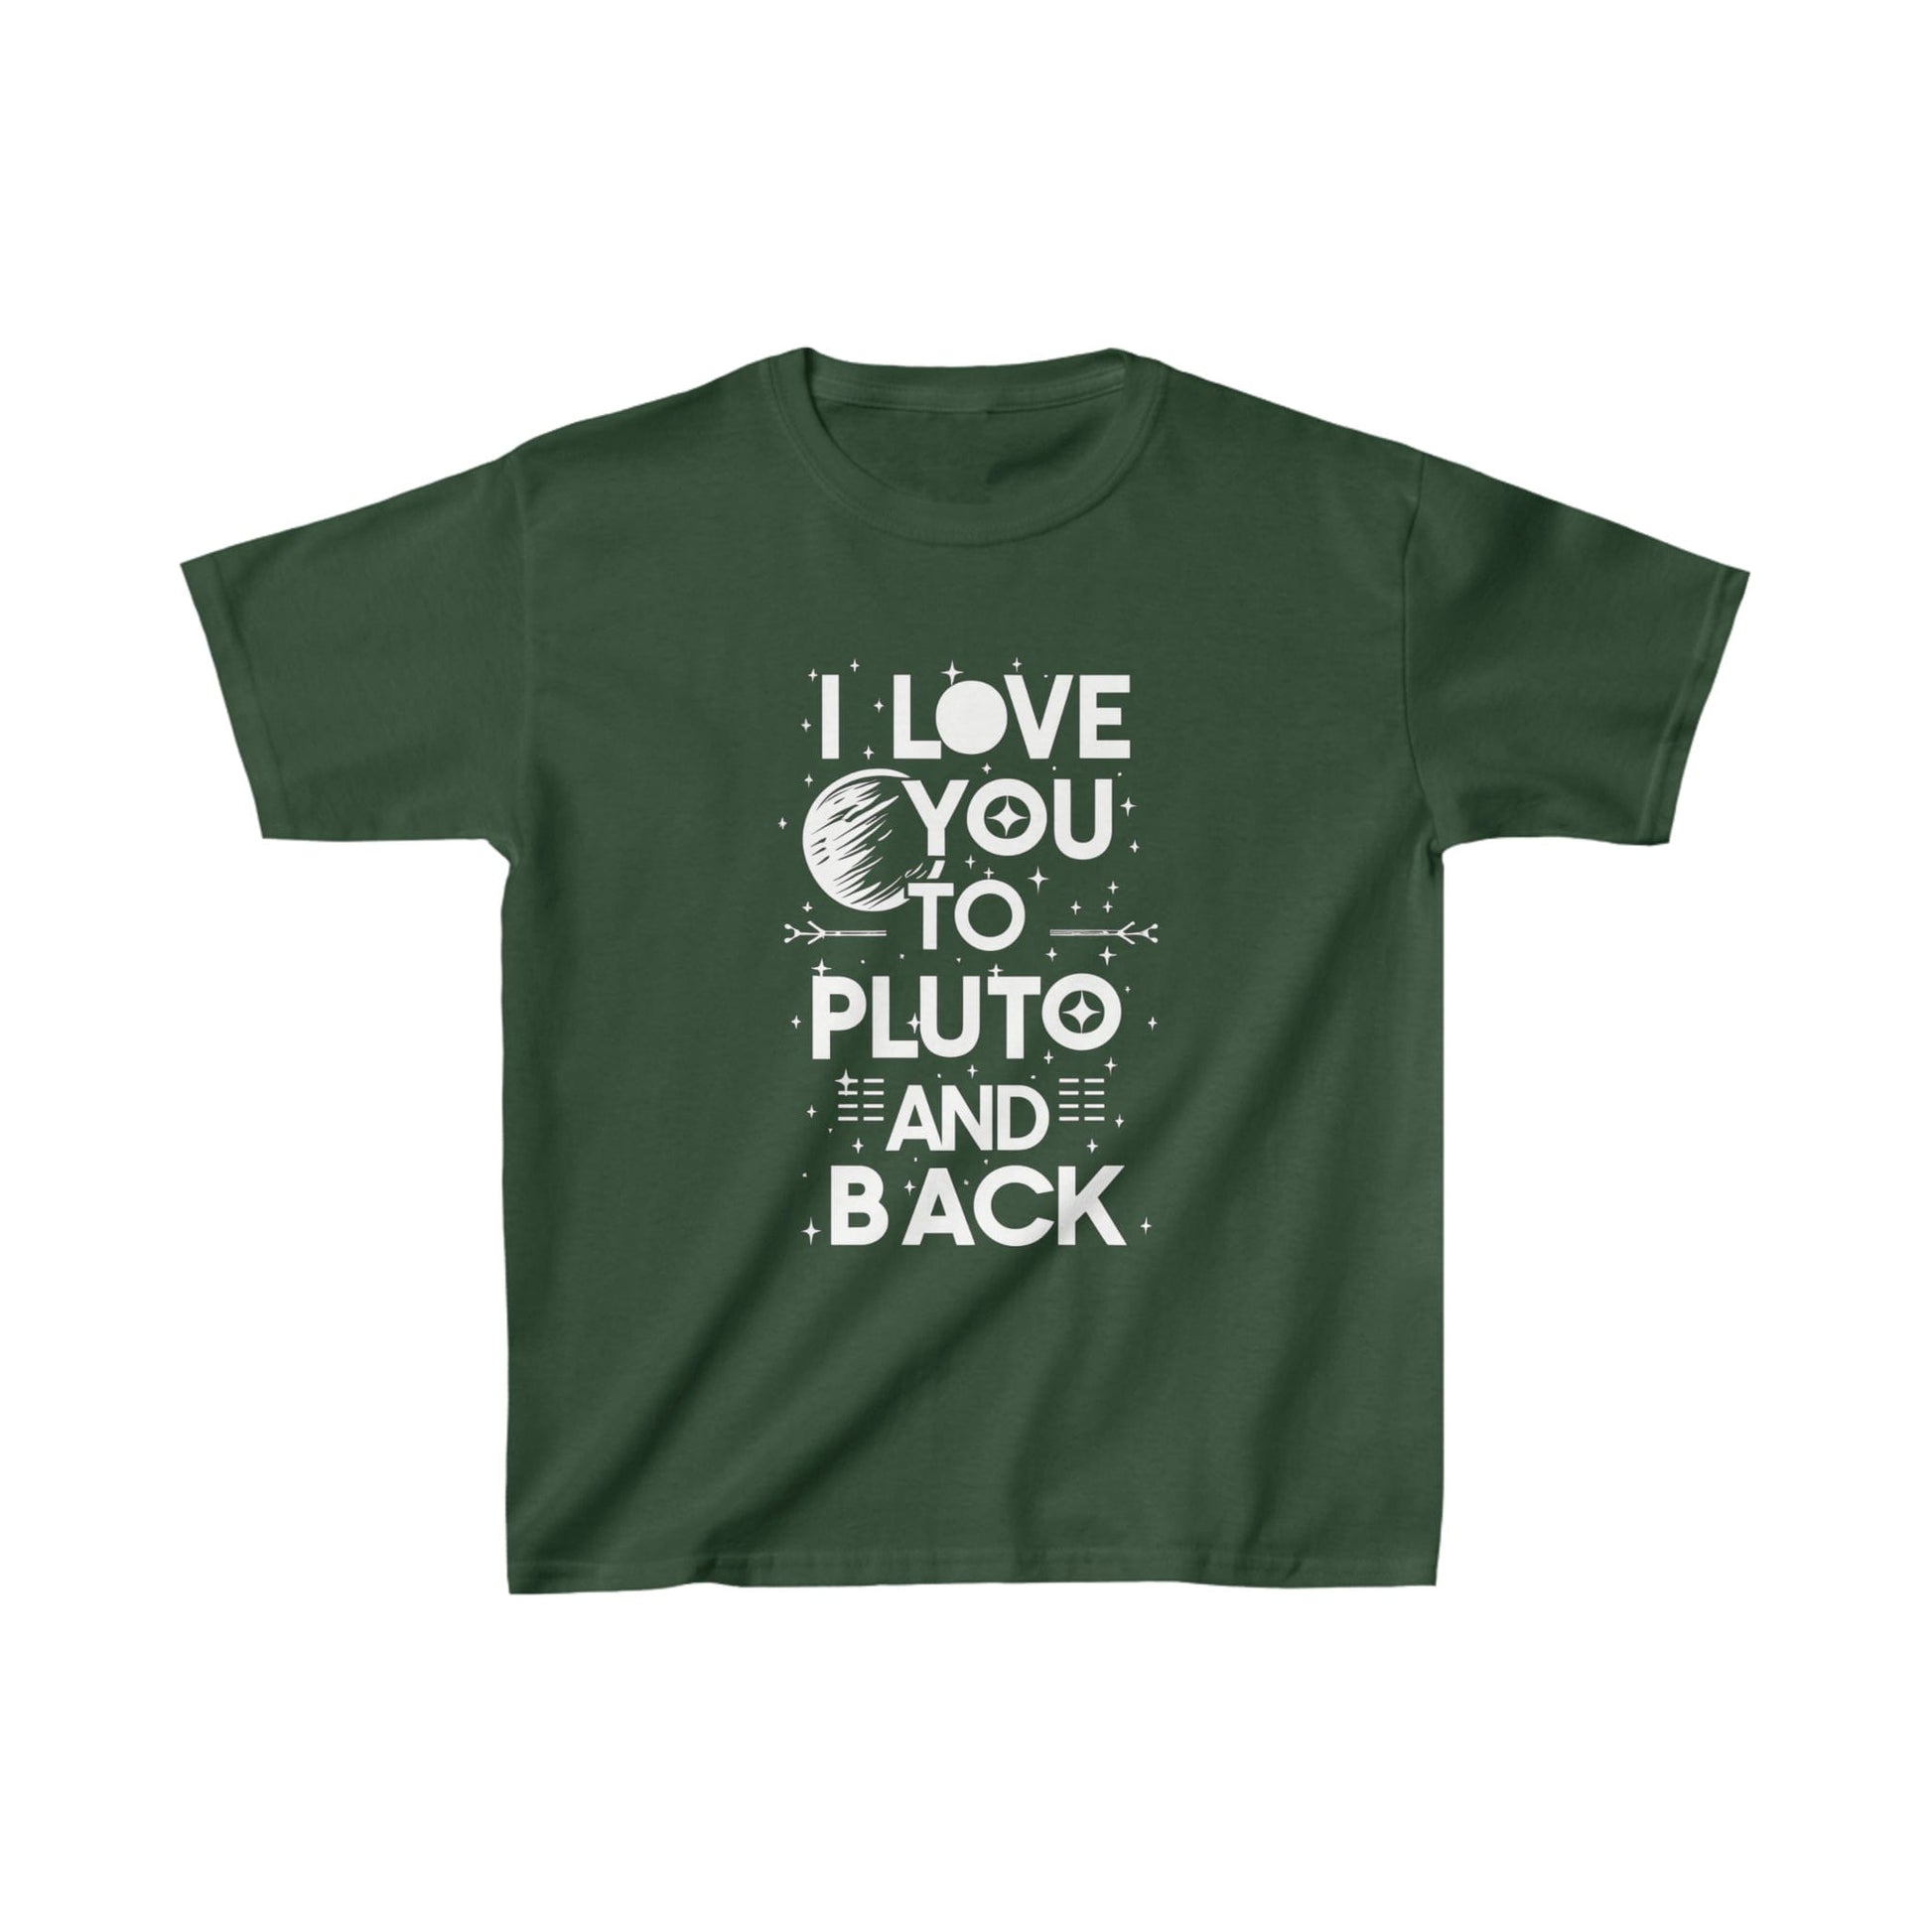 Kids clothes XS / Forest Green Youth I Love You to Pluto T-Shirt